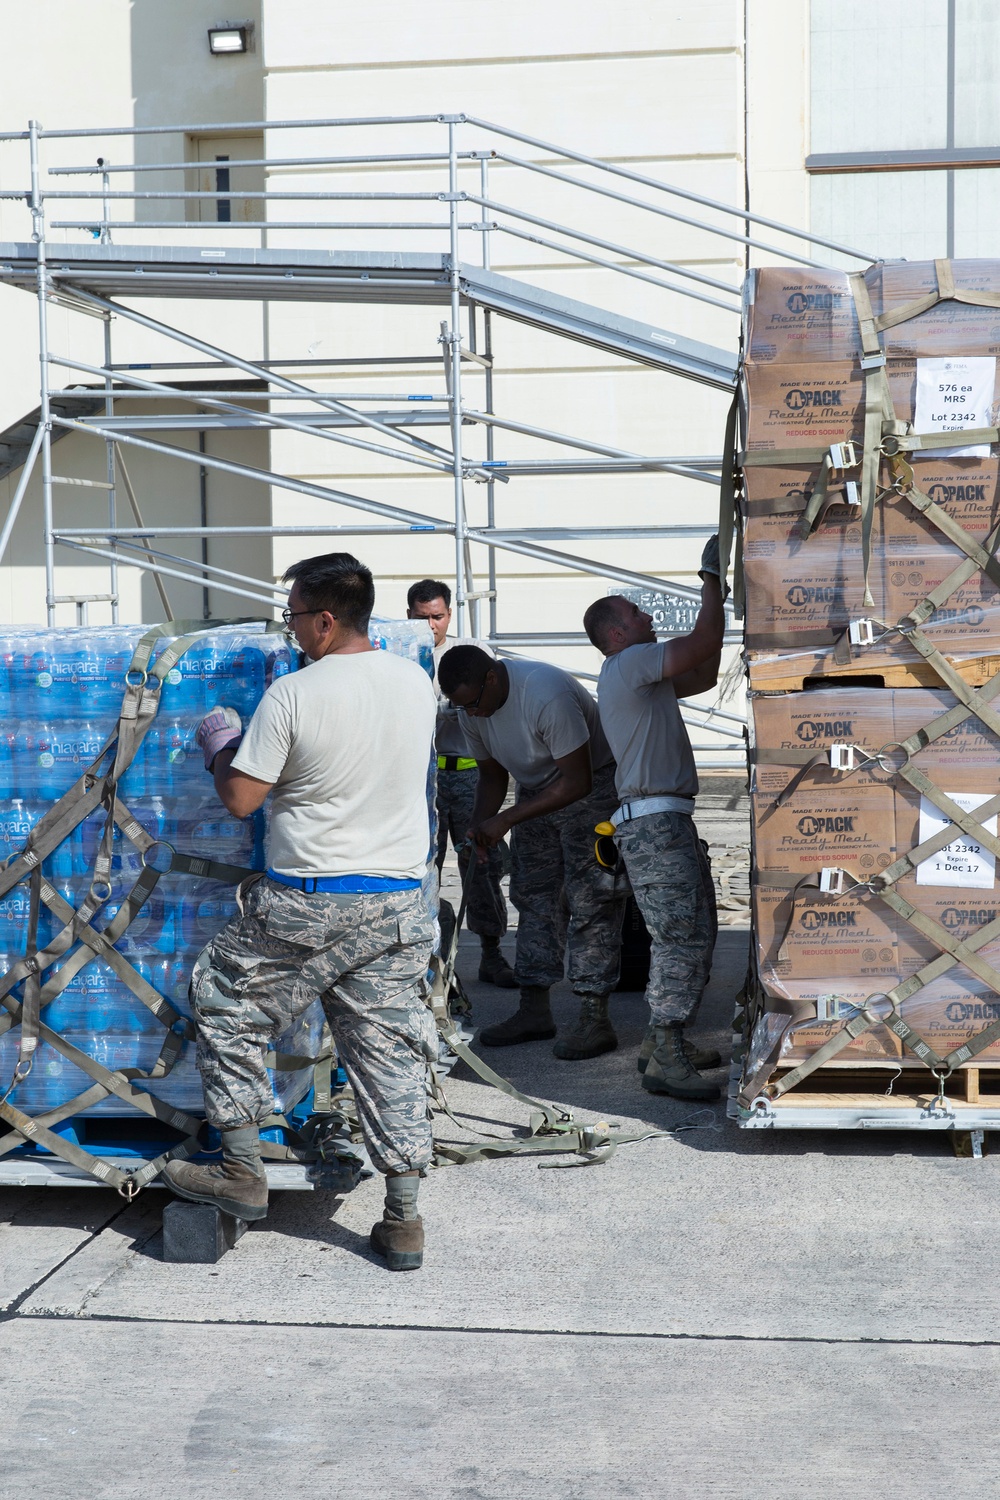 502nd LRS contribute to Hurricane Maria relief efforts